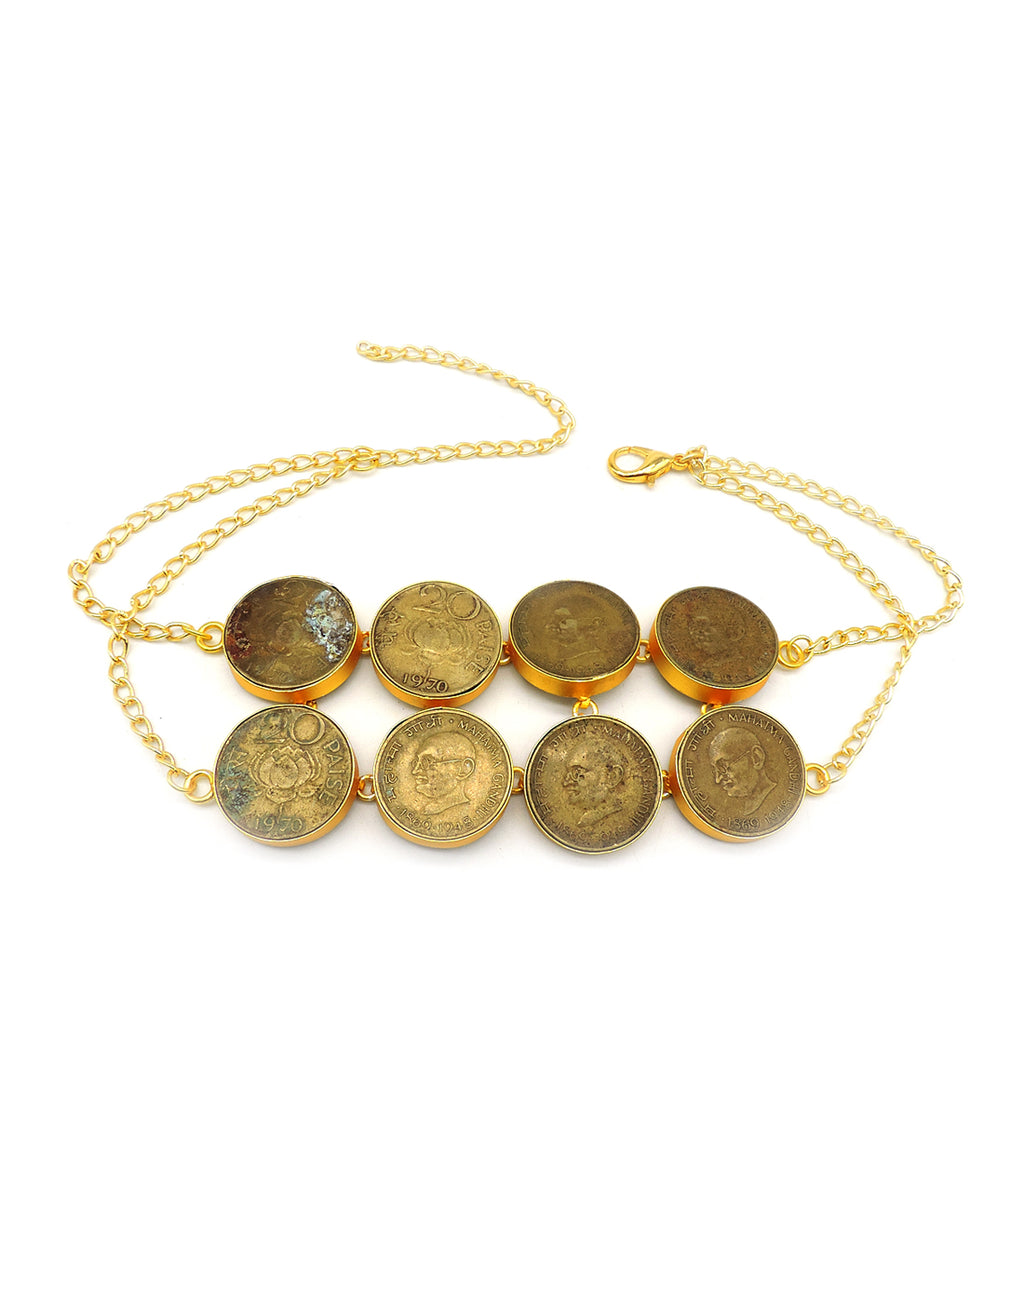 Coin Row Necklace - Statement Necklaces - Gold-Plated & Hypoallergenic Jewellery - Made in India - Dubai Jewellery - Dori